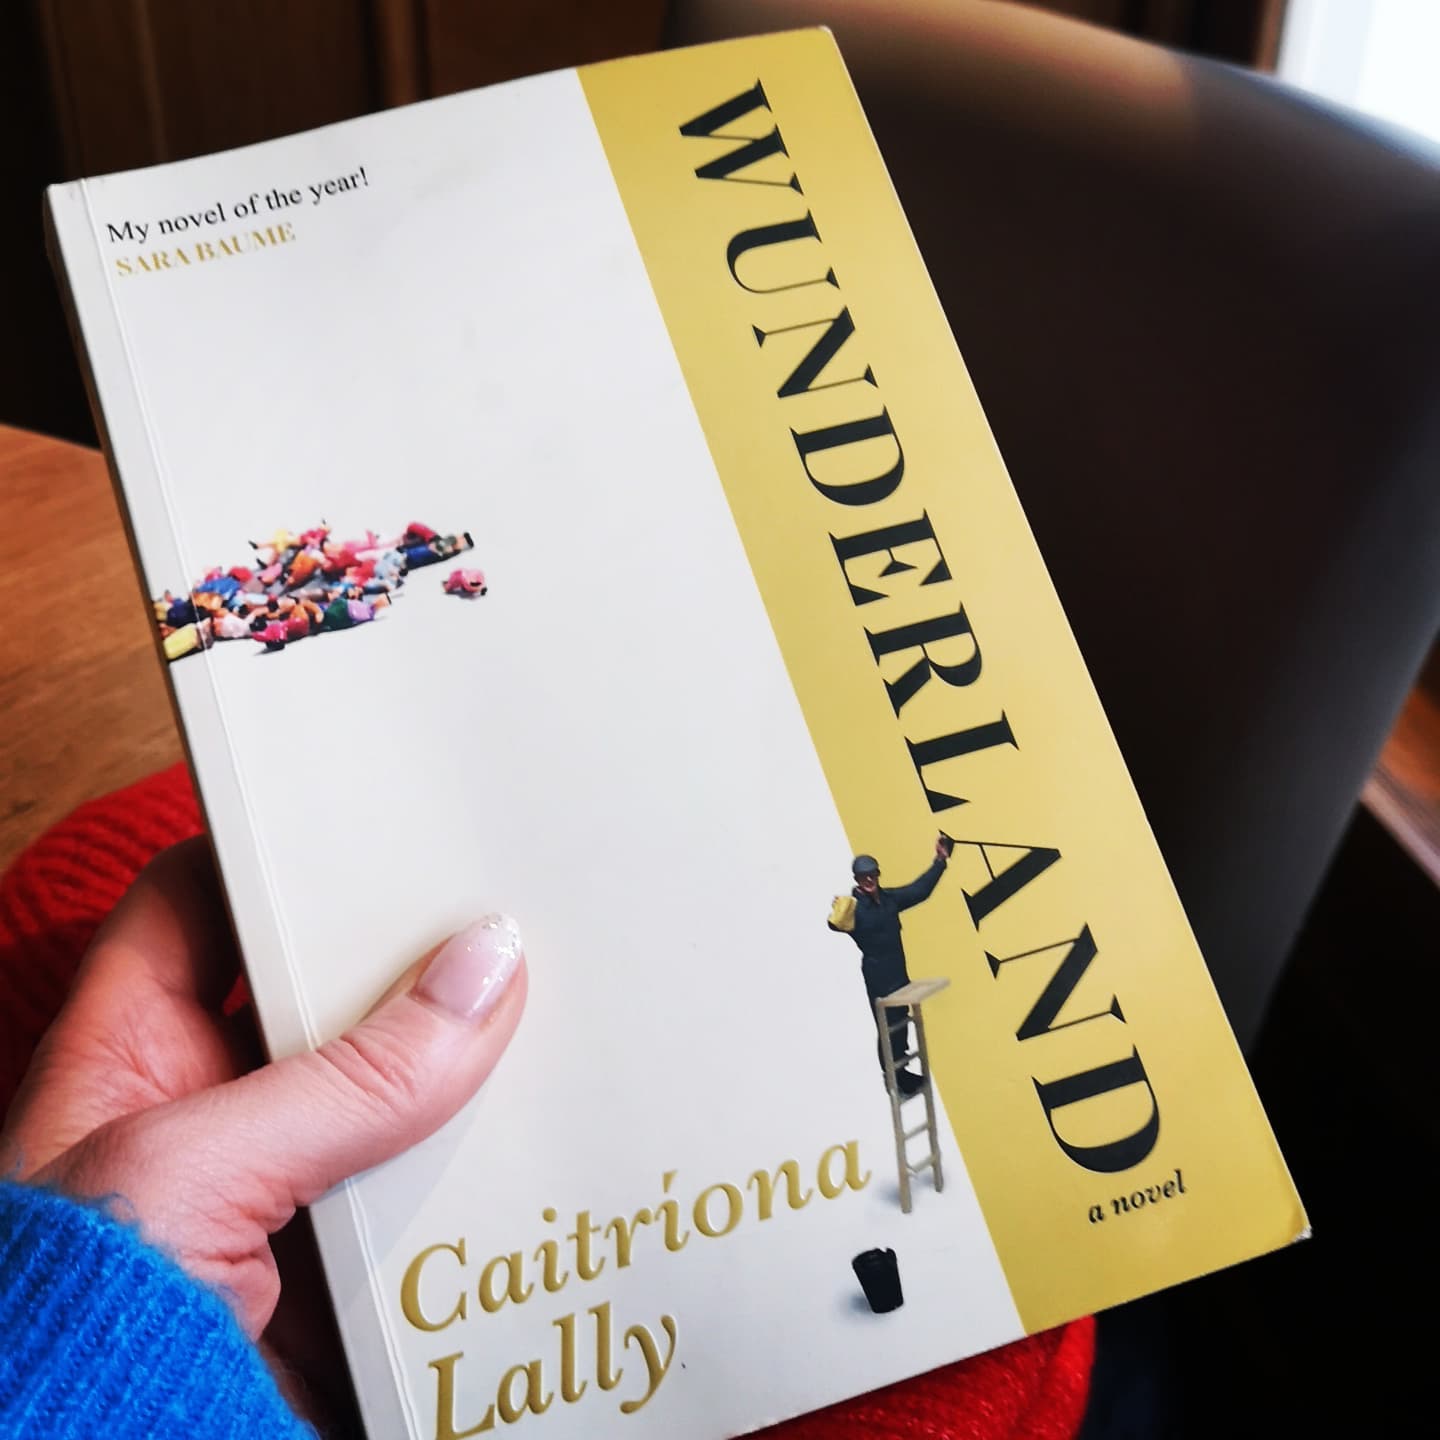 Wunderland by Caitriona Lally.
I love when you get a gift of a book that you maybe would not have picked up yourself. Thank you to @hamsterfox, fellow book-nerd and very fast reader too.
I've heard of Caitriona Lally, of course. She's won some pretty big writing prizes and Wunderland is her 2nd novel.
I really really liked many things about this book.
I admired Caitriona's ability to tell a unique, often untold and not understood story of depression, mental lllness and suicide. Yes, it's a hard read but I read it quickly.
The story centres around a brother and sister. The brother has been effectively banished by his family to Hamburg and his sister stays with him for 6 days. Roy, the brother is a cleaner in a Wunderland museum, a museum of miniature lands and people. Gert, the sister is running away from her married life, her children and her husband who suffers from depression and has attempted suicide many times.
Gert and Roy rub off each other in bad ways. They annoy each other. At times they dislike each other.
Roy is also odd, different, strange. He is building his own miniature world in his bedroom which culminates in a wonderfully paced ending. And the ending is great. It dangles a small bit of hope yet it reminds us we can never run away from what's in our own heads. What's in the head needs to be dealt with first.
As I said I did really like this. Caitriona writes inner thoughts superbly. At times I thought the inner thoughts could have been pulled back a bit and I would have liked to see why Roy and Gert were so wounded. Their parents were quite normal. But maybe that's the point.
@newislandBooks